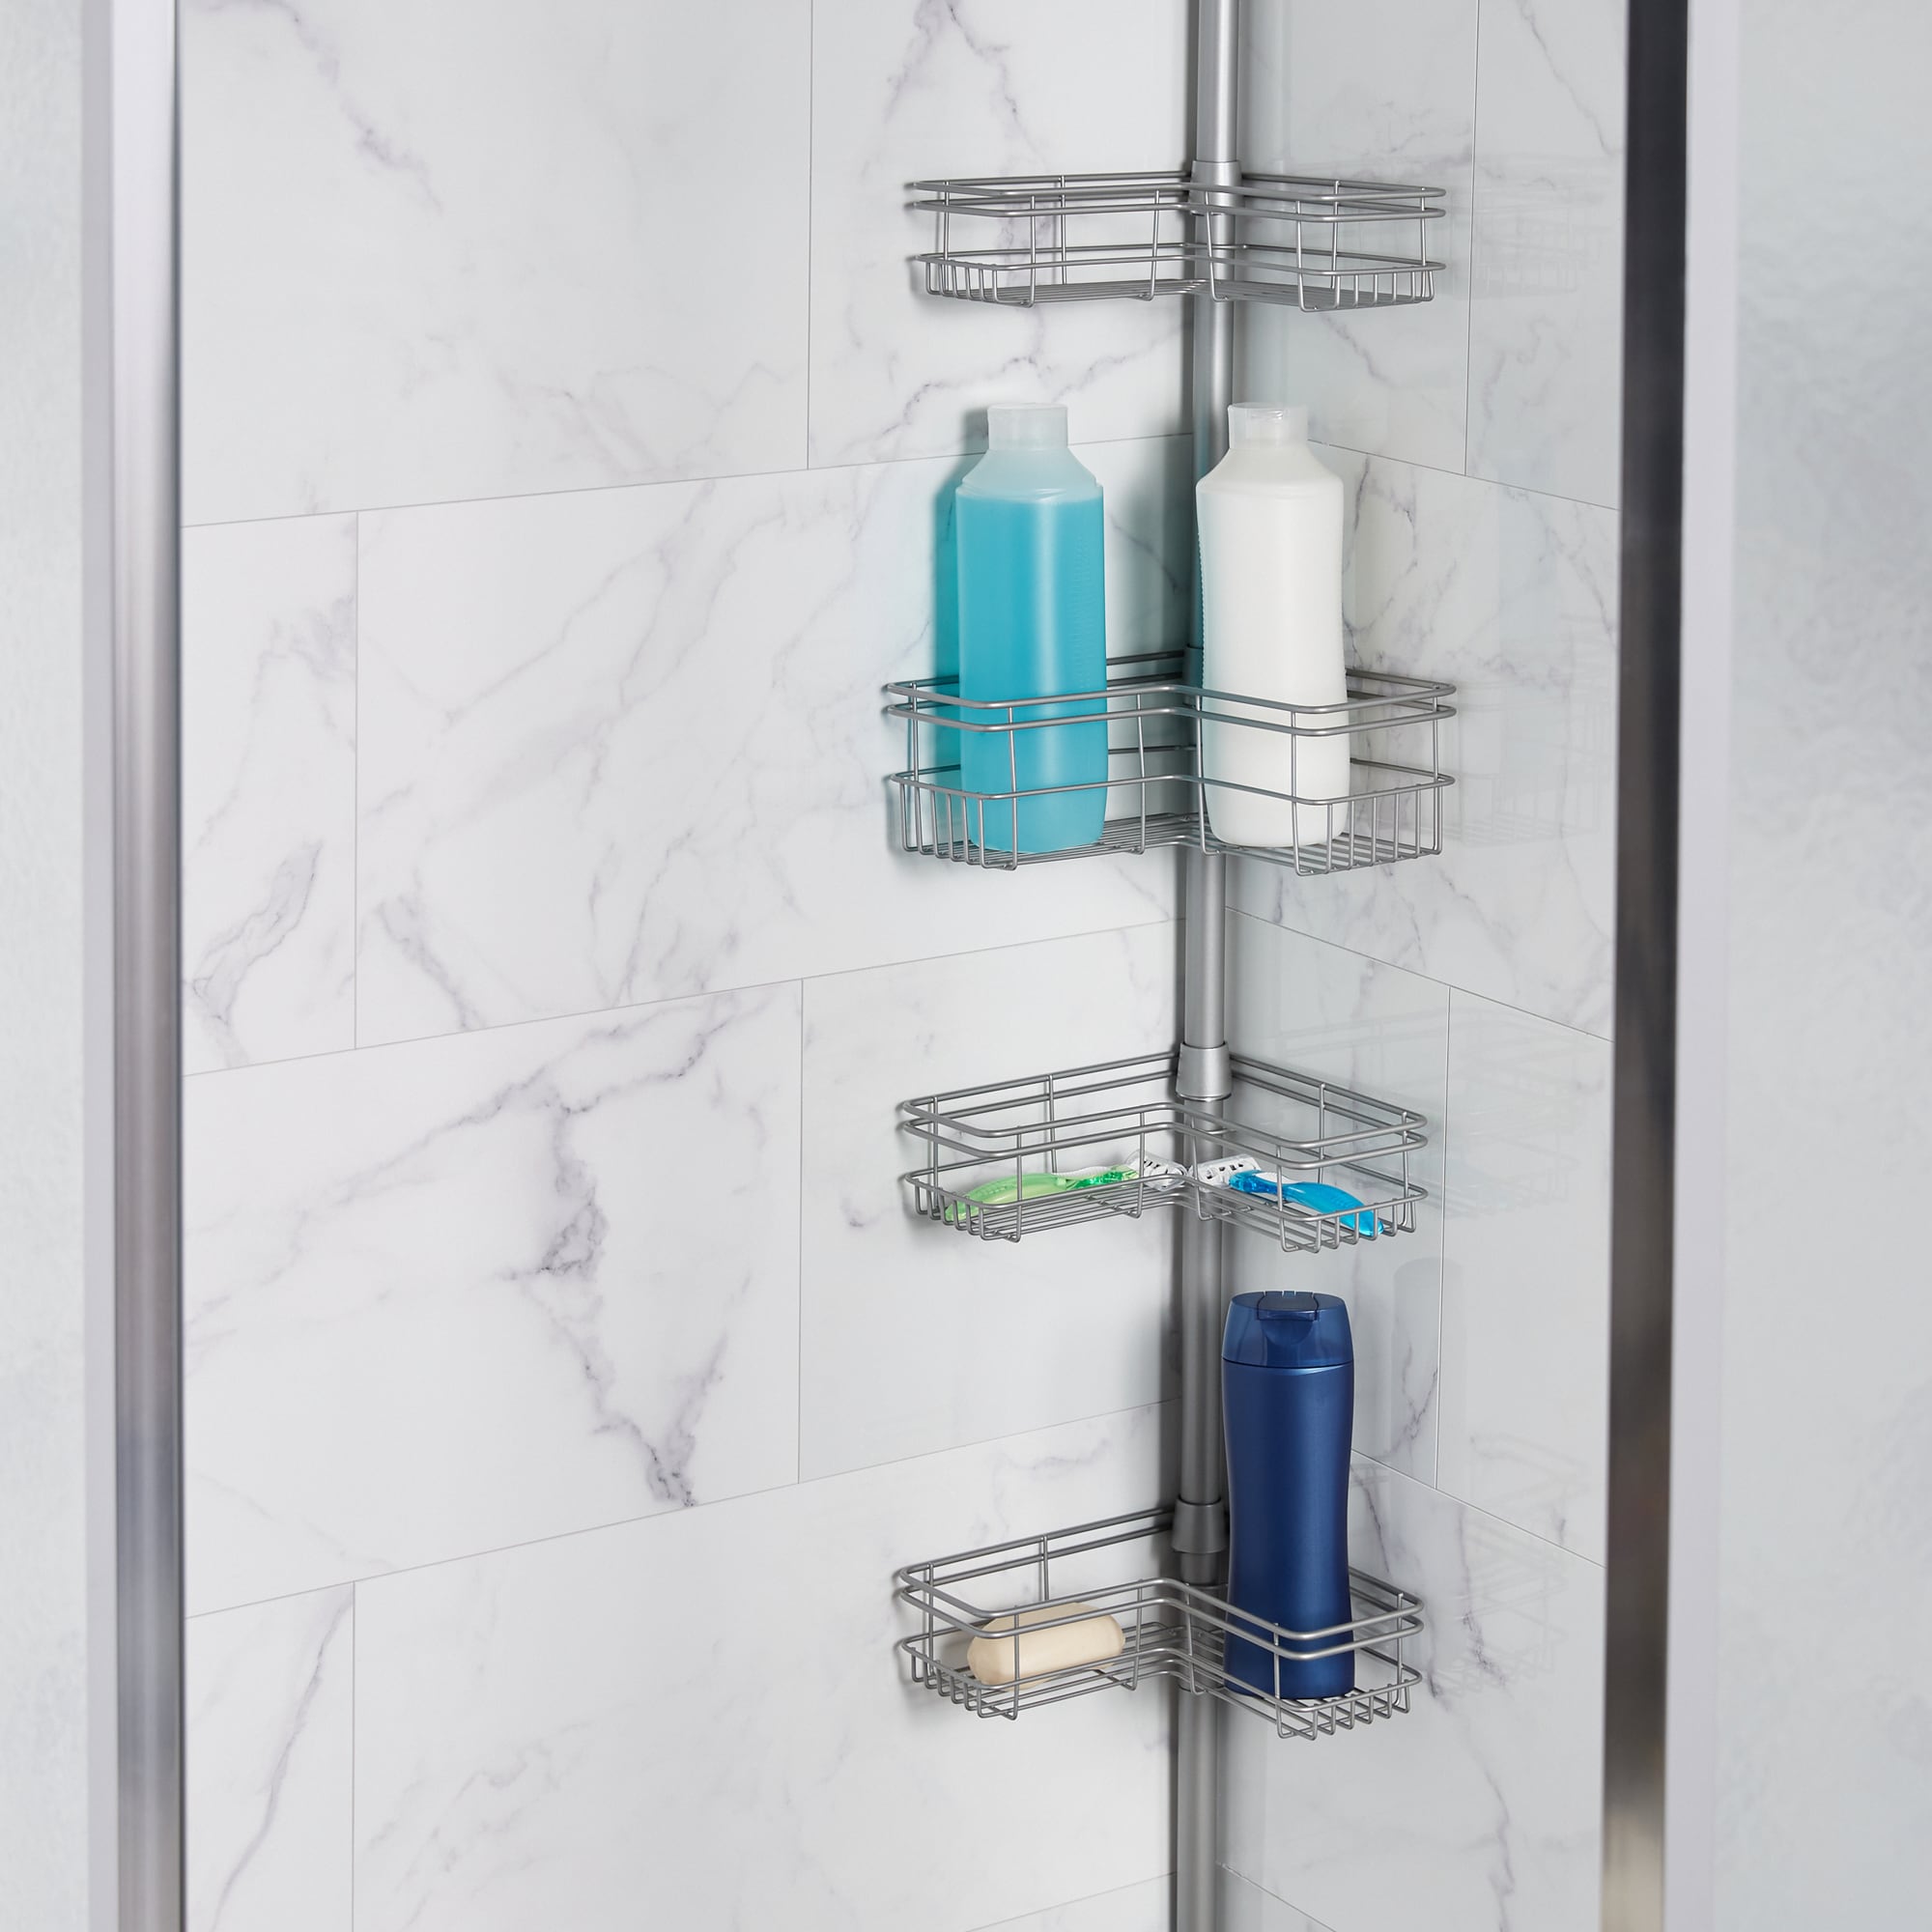 Zenith 97-in H Steel Nickel and Chrome Tension Pole Freestanding Shower  Caddy at